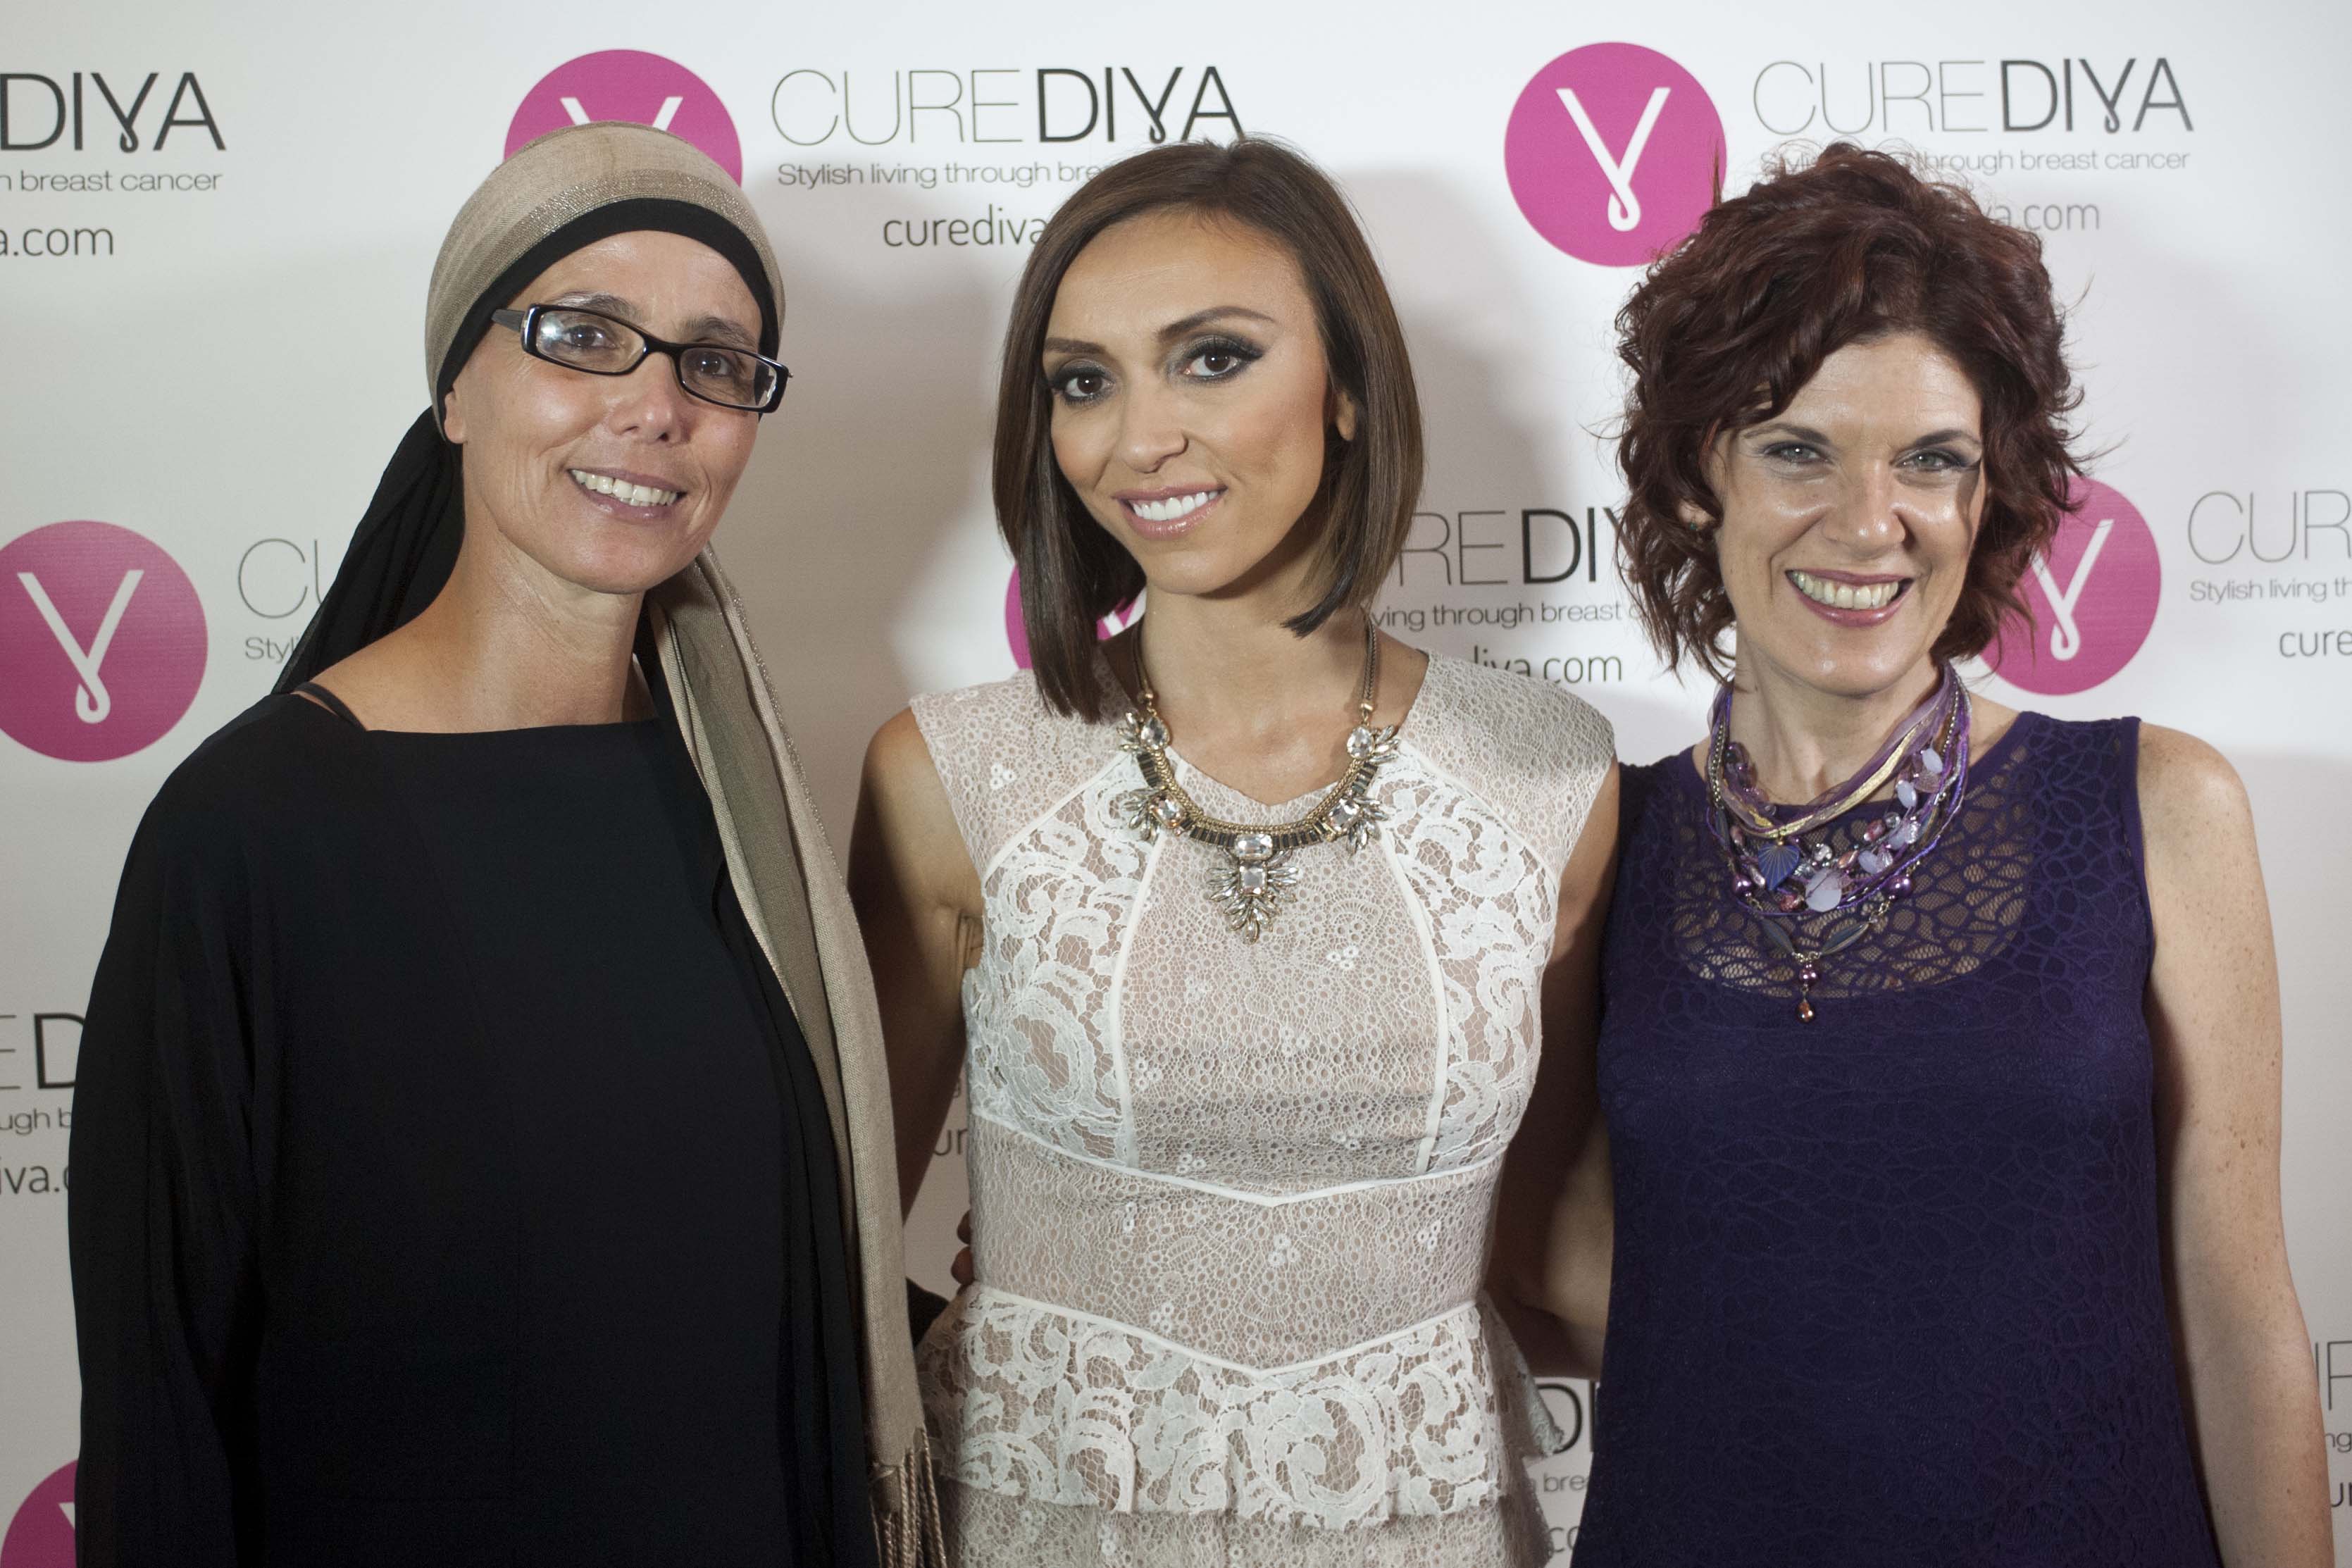 Giuliana Rancic and CureDiva co-founders Ester Gofer and Efrat Roman